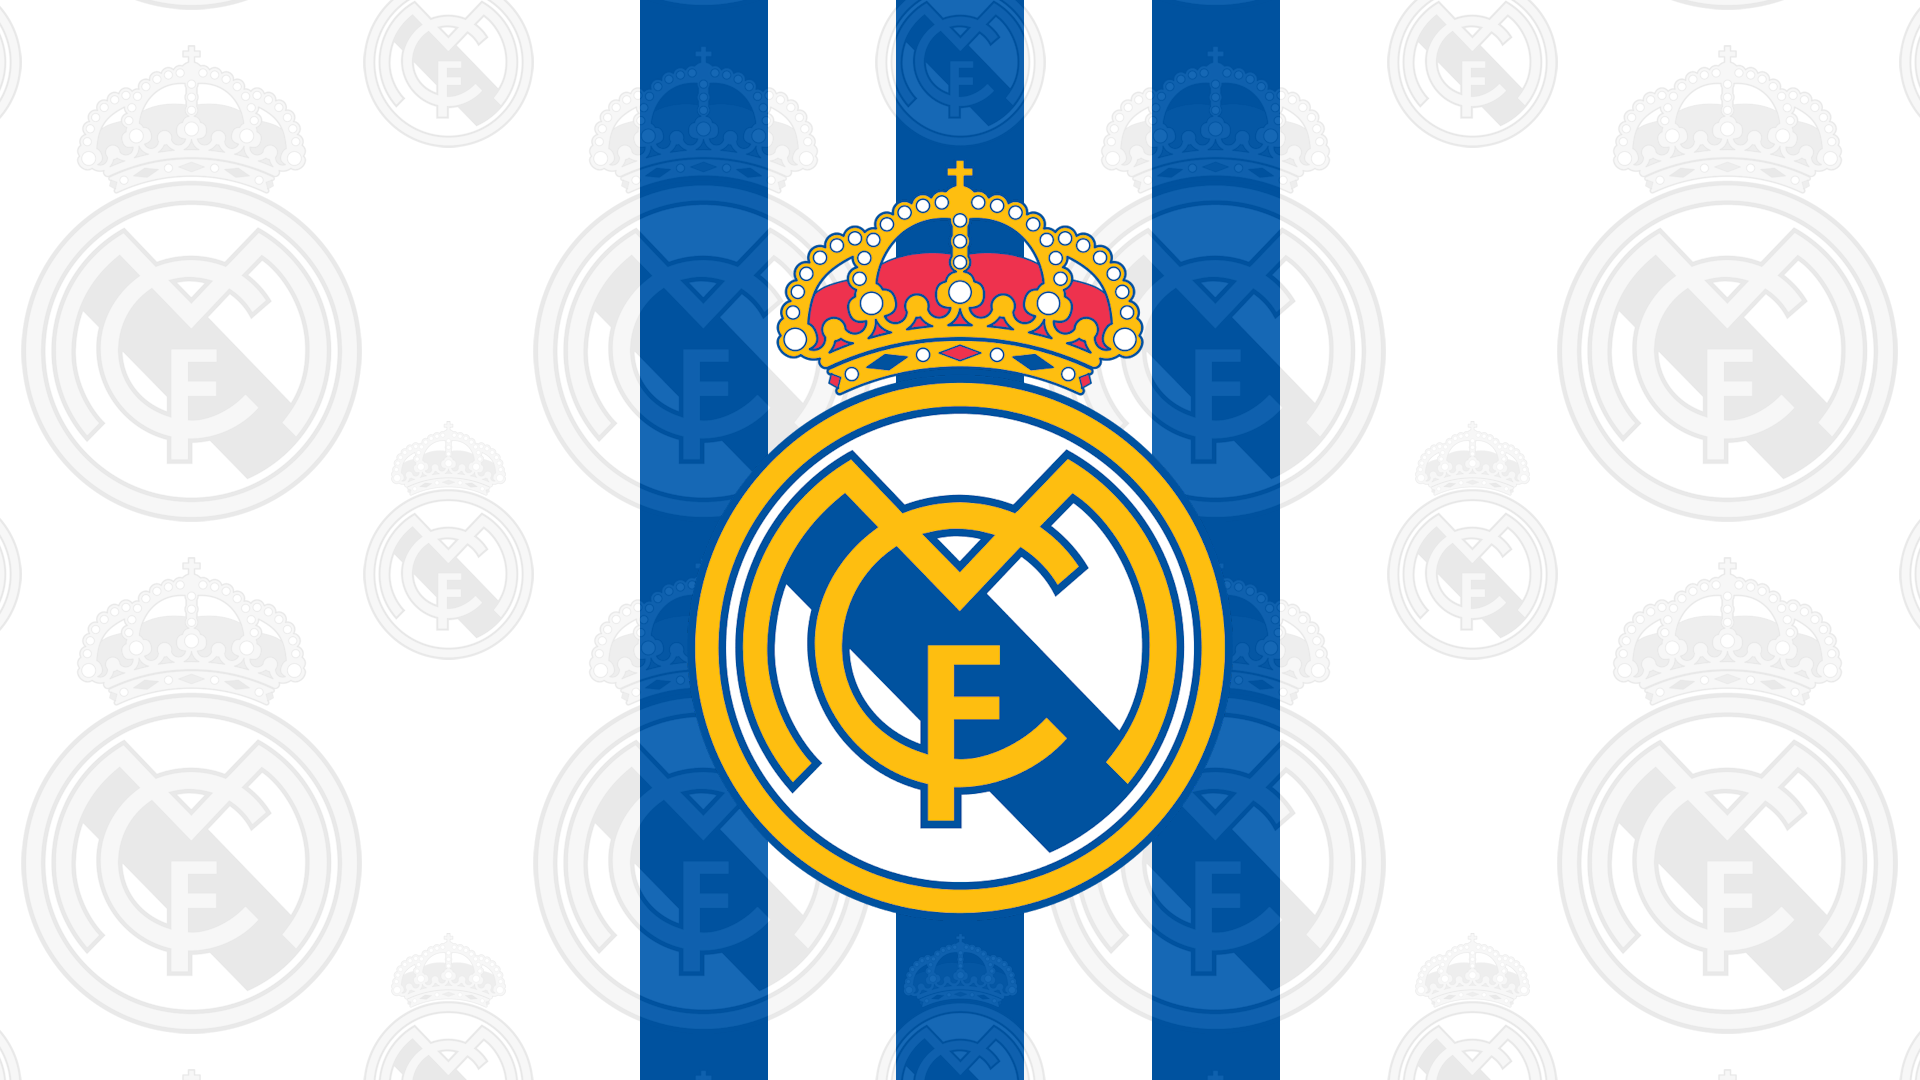 Real Madrid 2017 Wallpapers - Wallpaper Cave